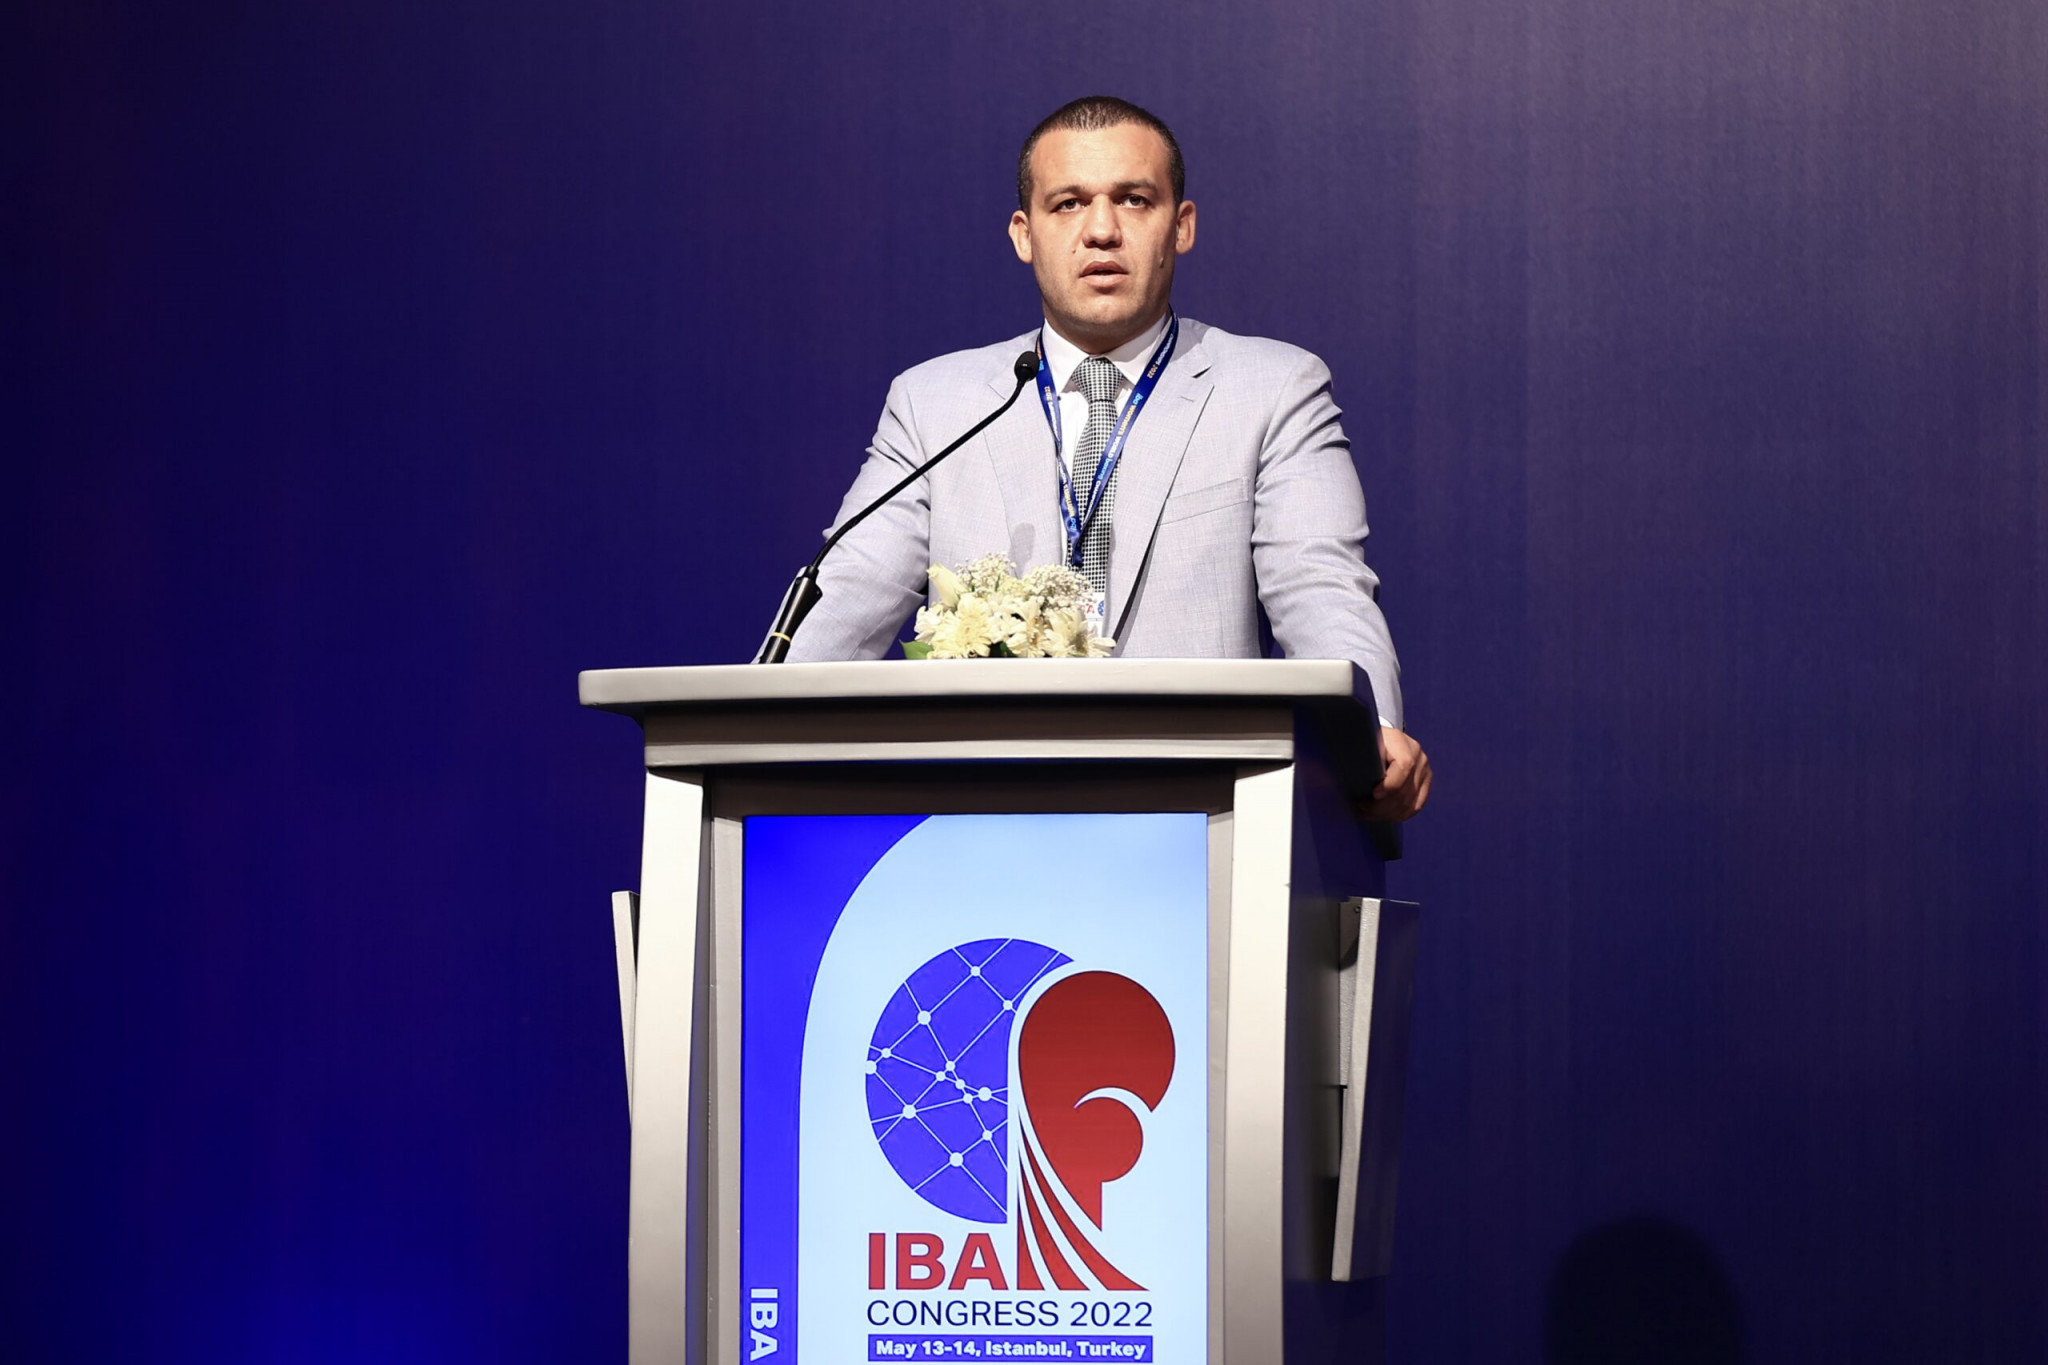 Russia's Umar Kremlev was elected as IBA President unopposed after Boris van der Vorst, his only rival, was controversially ruled out on the eve of the vote ©IBA